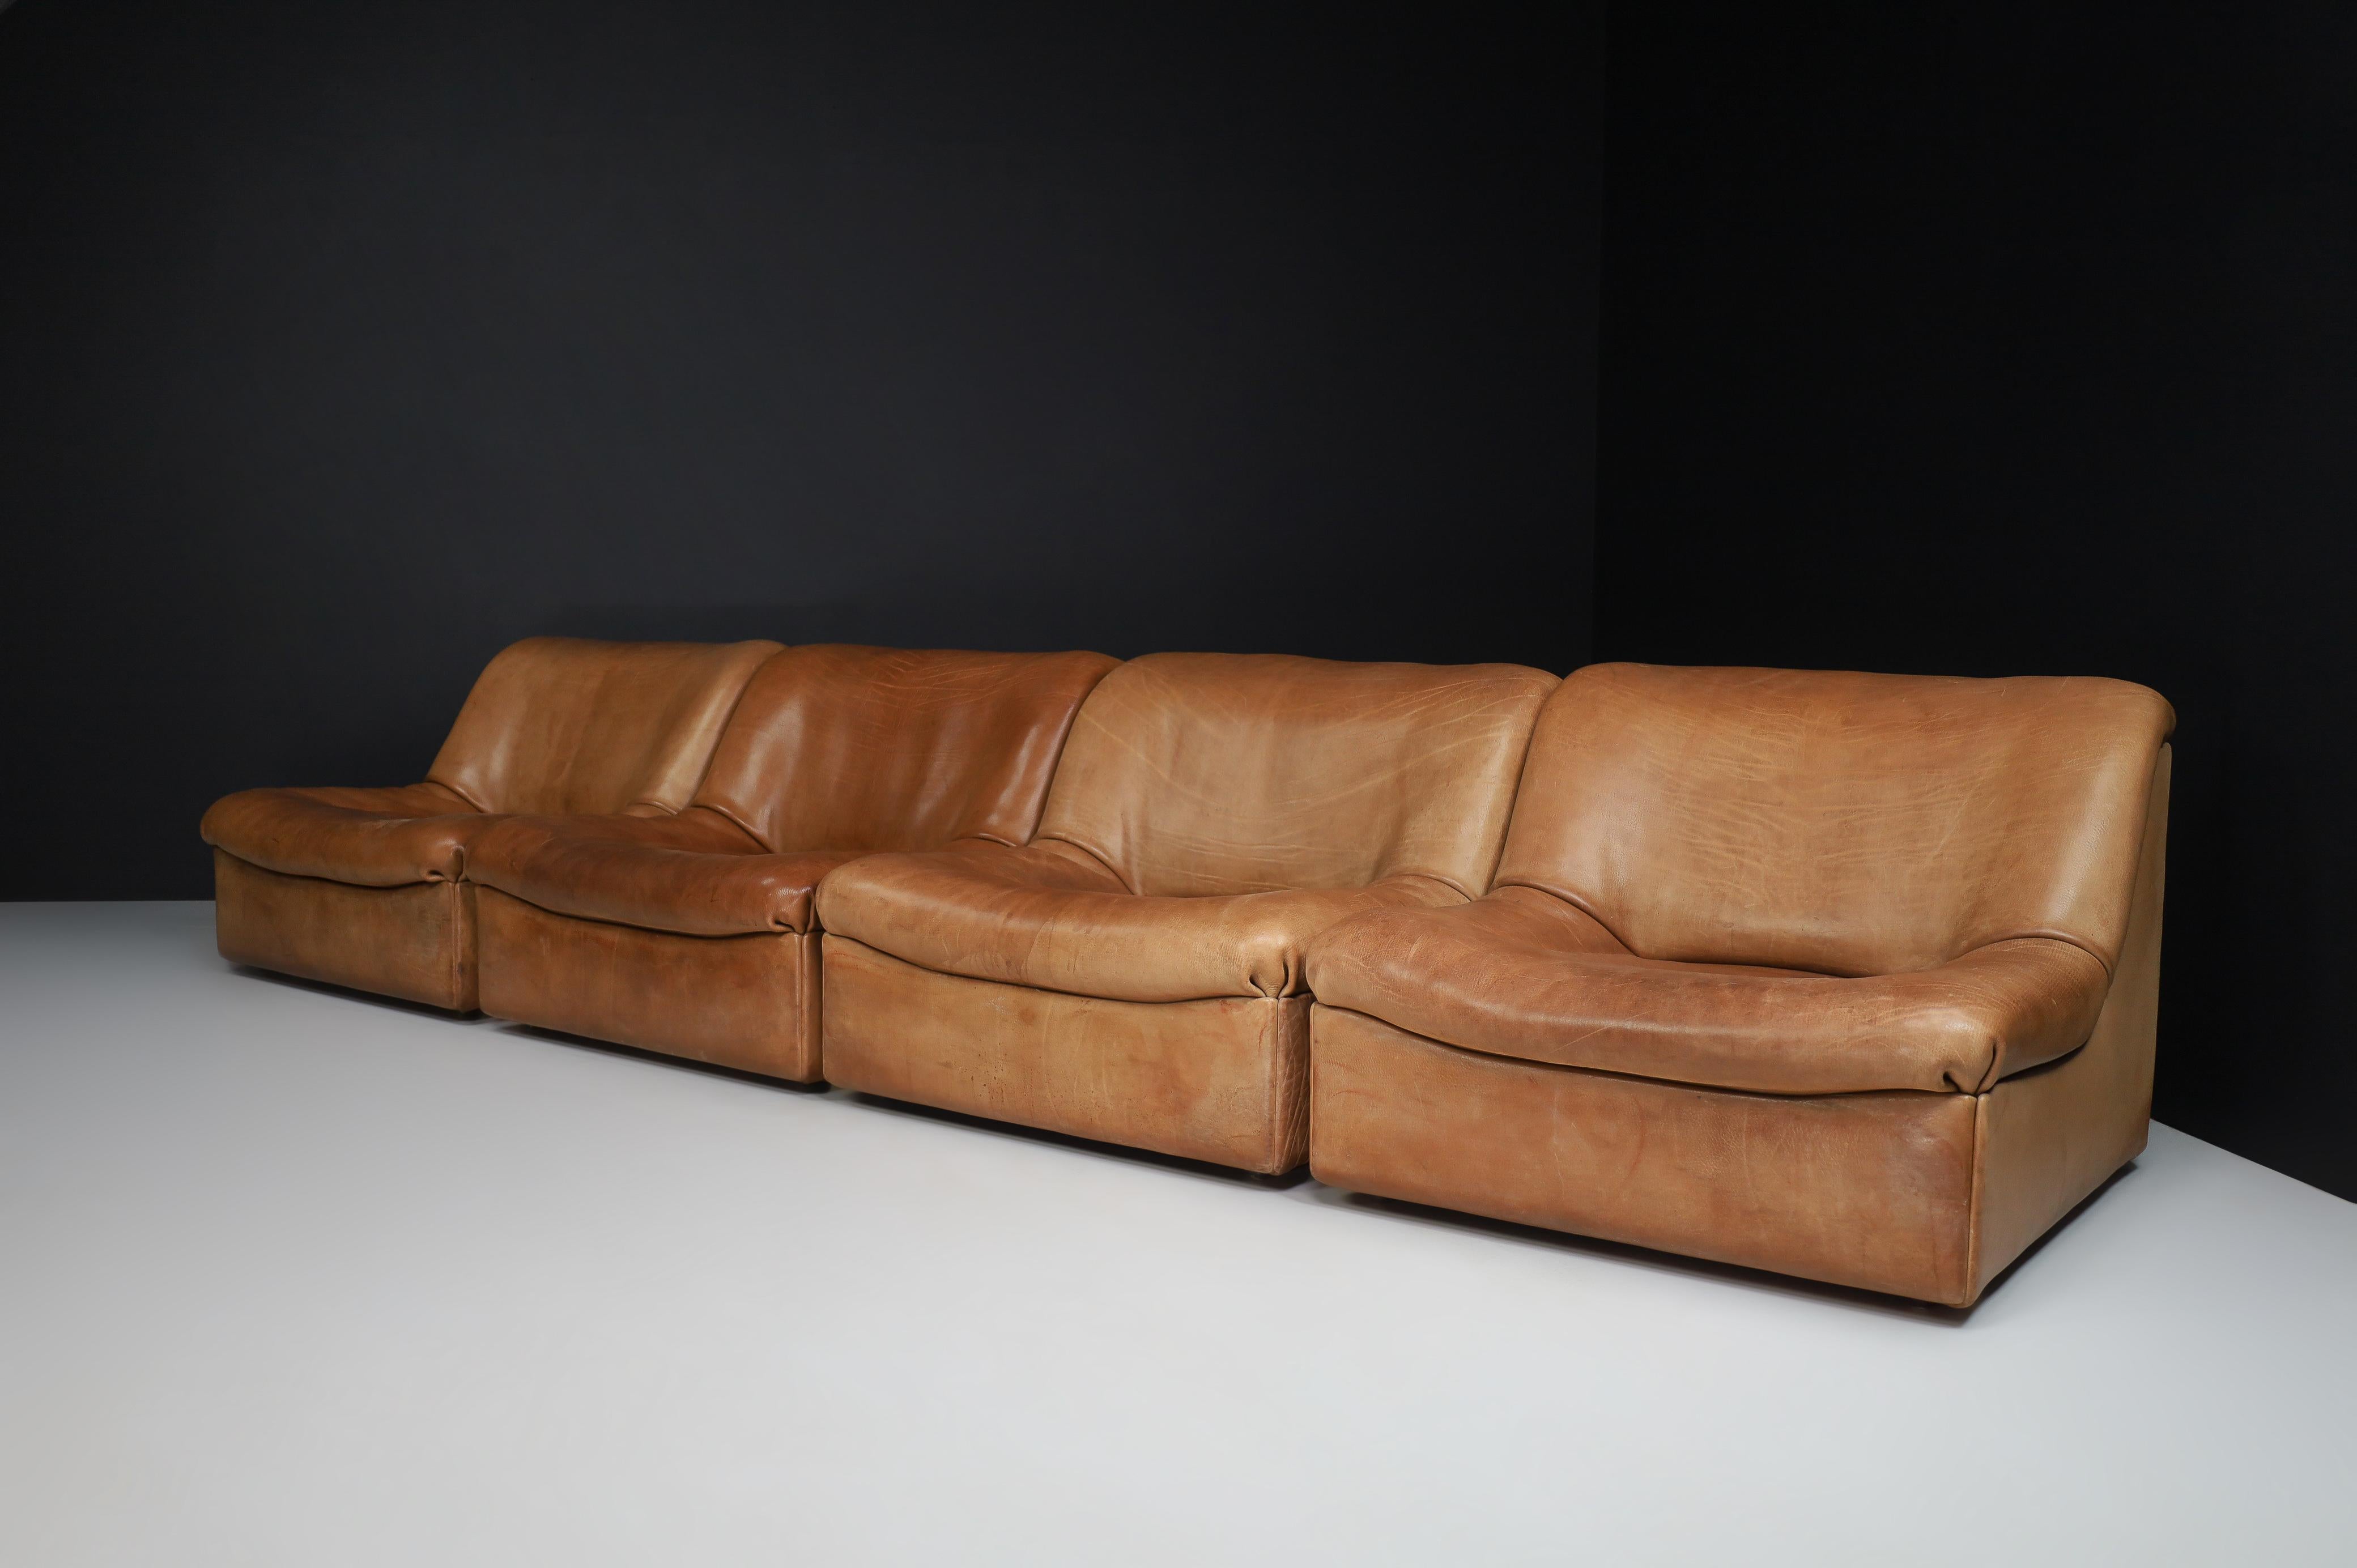 De Sede Ds46 Sectional Sofa-Livingroomset in Buffalo Leather, Switzerland 1970s For Sale 8